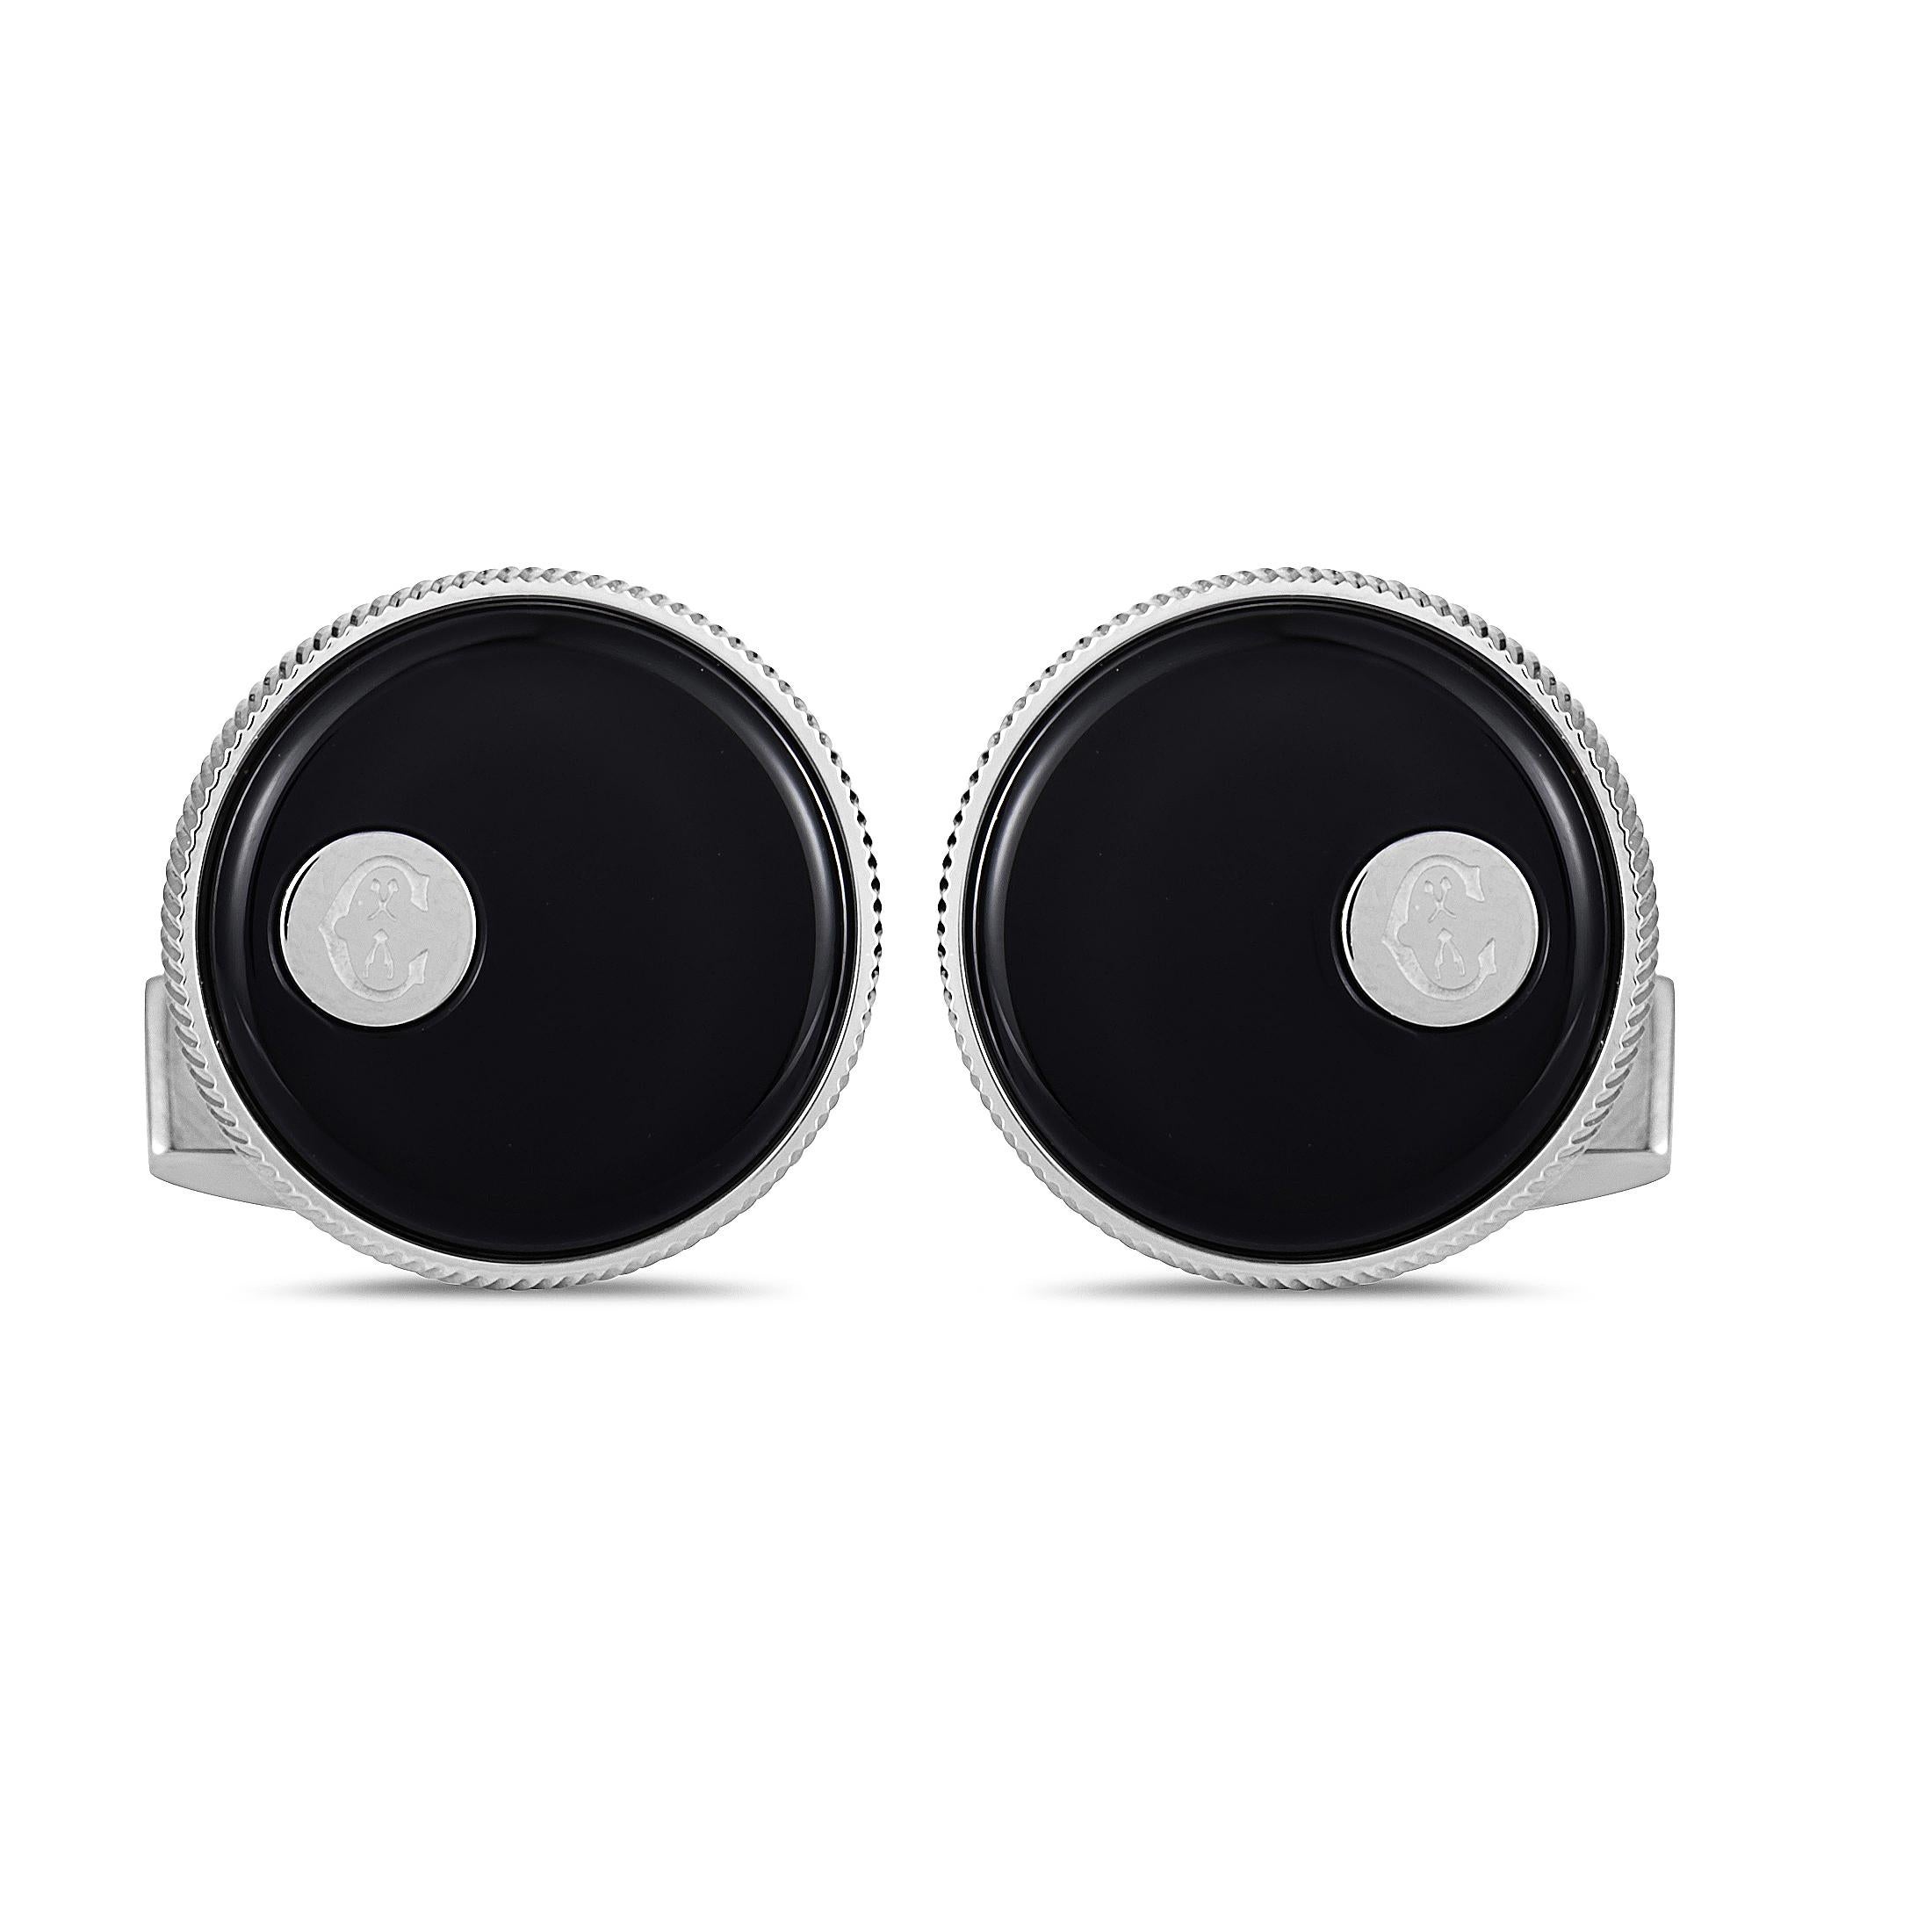 Placed amidst an immaculately smooth and captivatingly gleaming sea of alluring darkness, the nifty medallions adorned with the brand's iconic logo are provided brilliant contrast by the stunning onyx stones in this magnificent pair of expertly